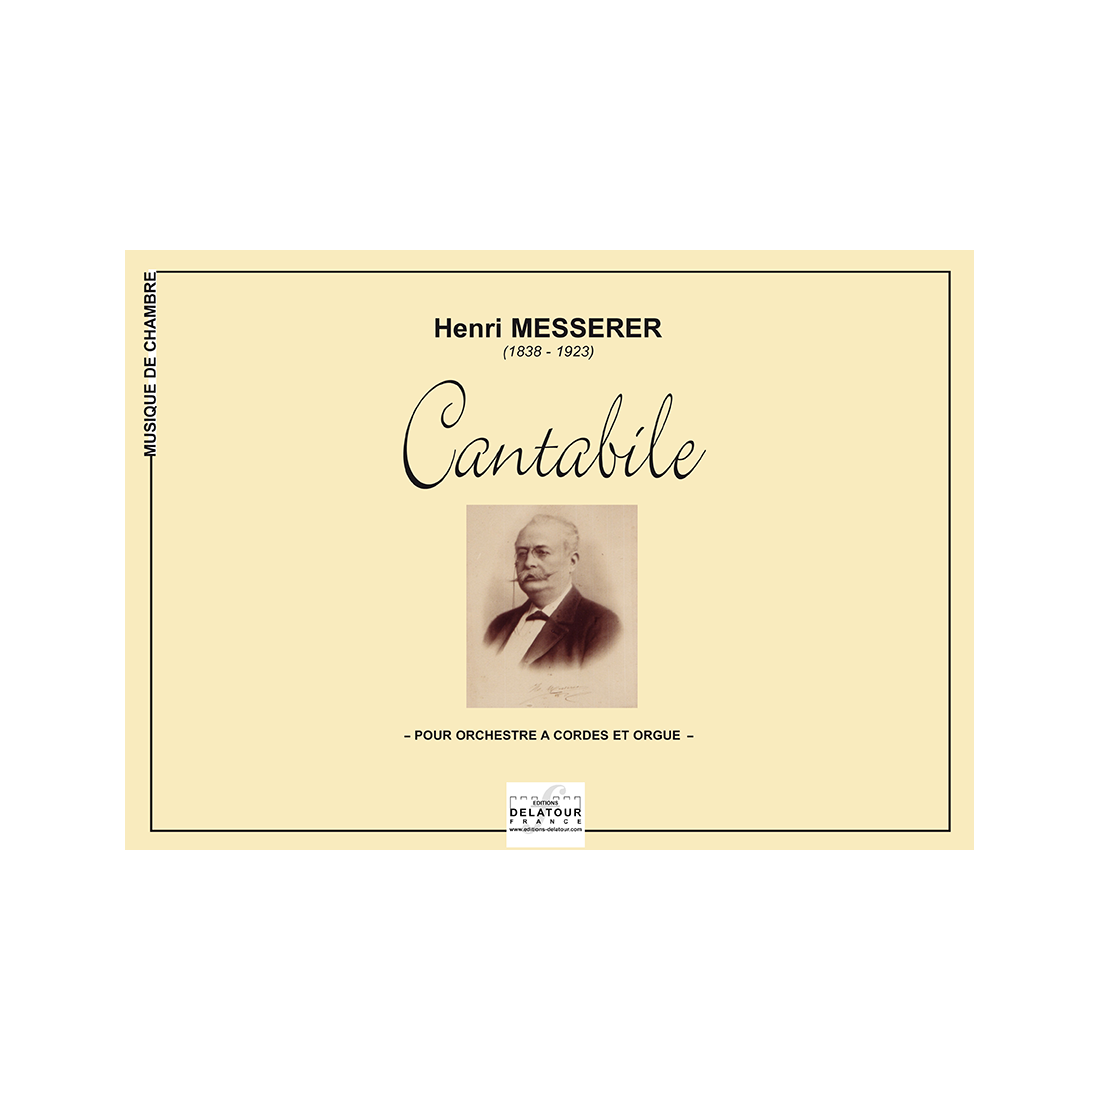 Cantabile for string orchestra and organ